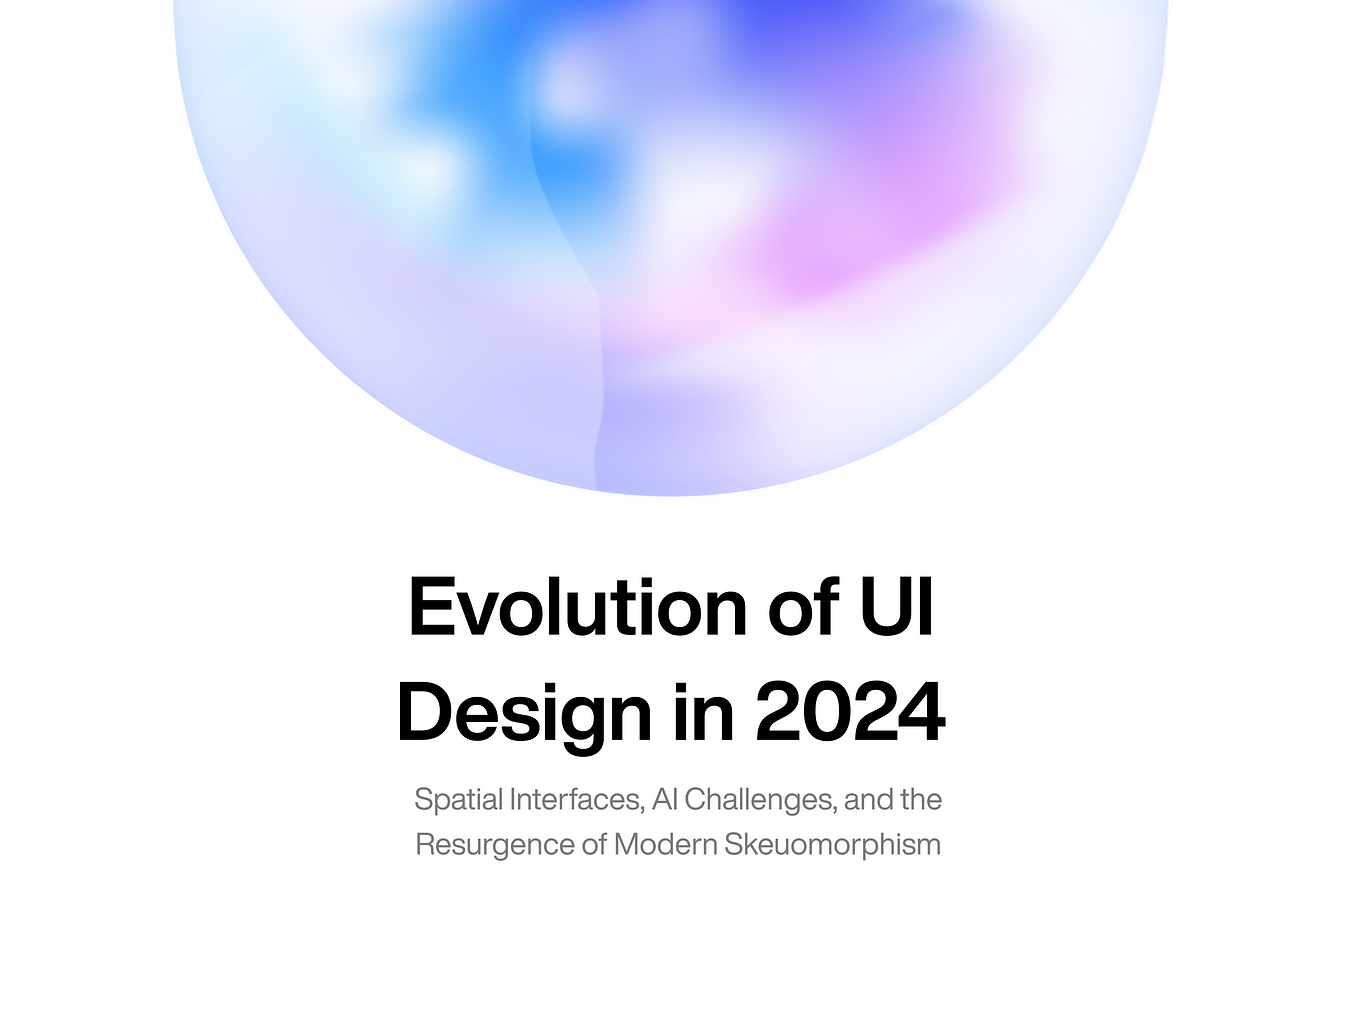 Evolution of UI Design in 2024: Navigating Spatial Interfaces, AI Challenges, and the Resurgence of Modern Skeuomorphism